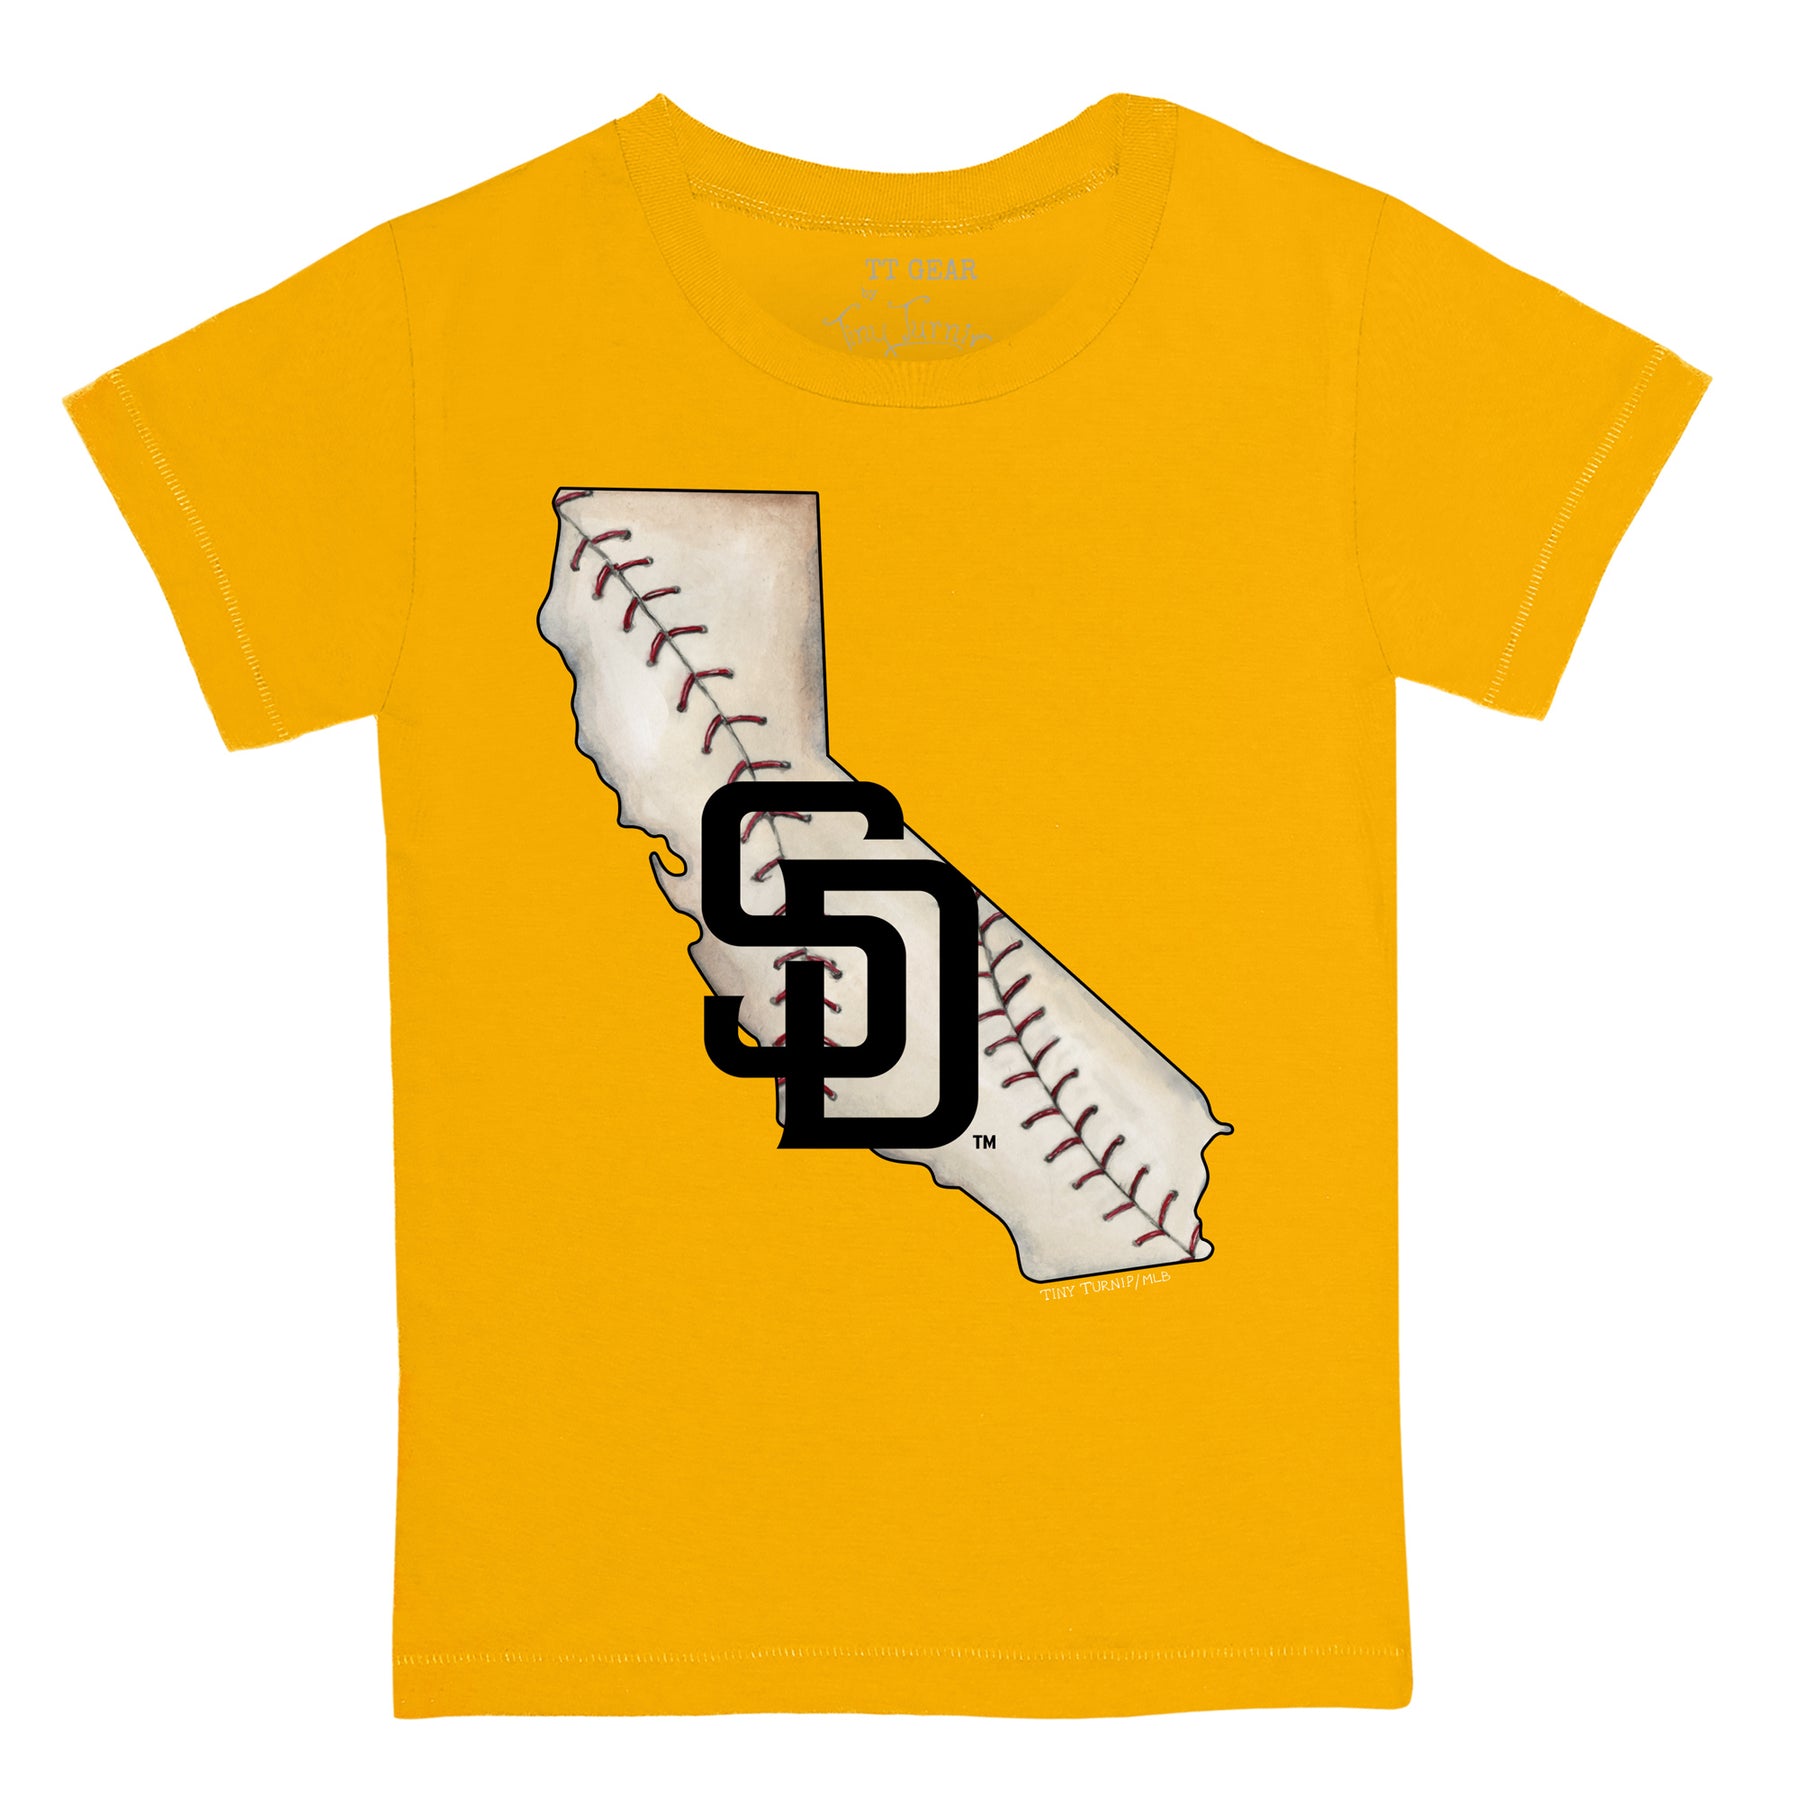 San Diego Padres State Outline Tee Shirt Women's 3XL / White